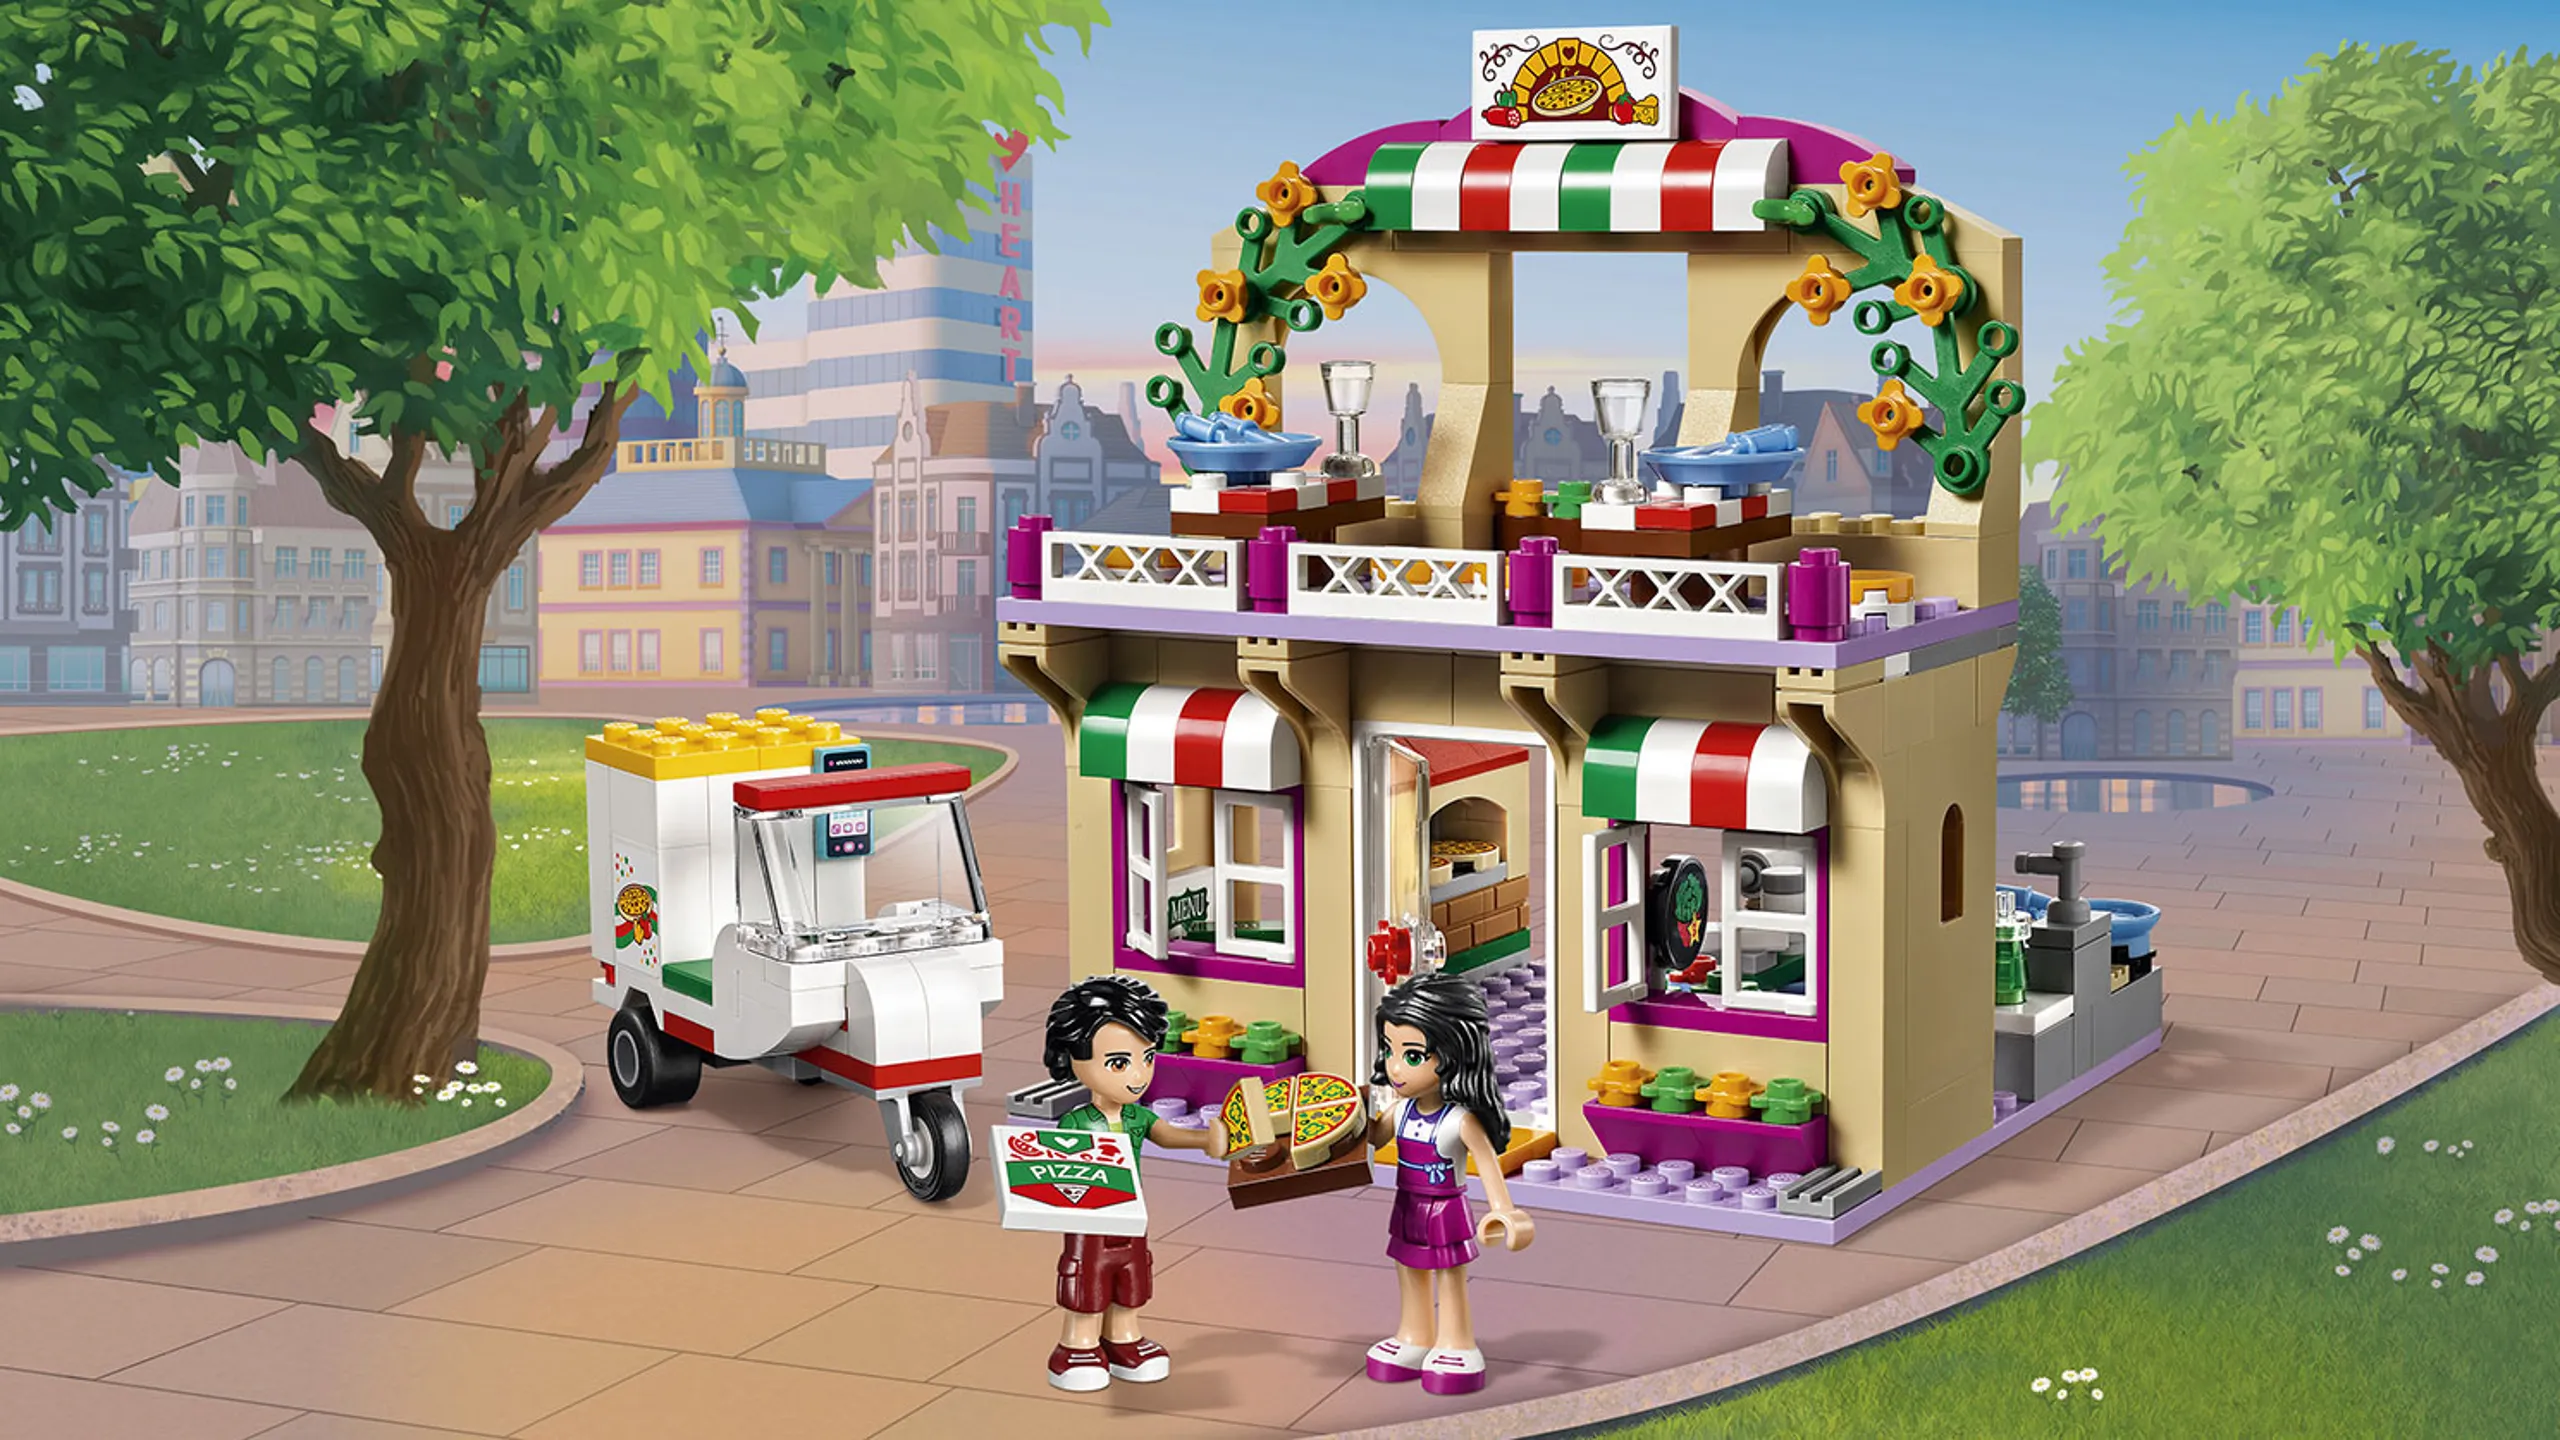 LEGO Friends - 41311 Heartlake Pizzeria - Emma works at the Italian styled pizzeria in Heartlake and Oliver delivers pizzas with the special delivery scooter.